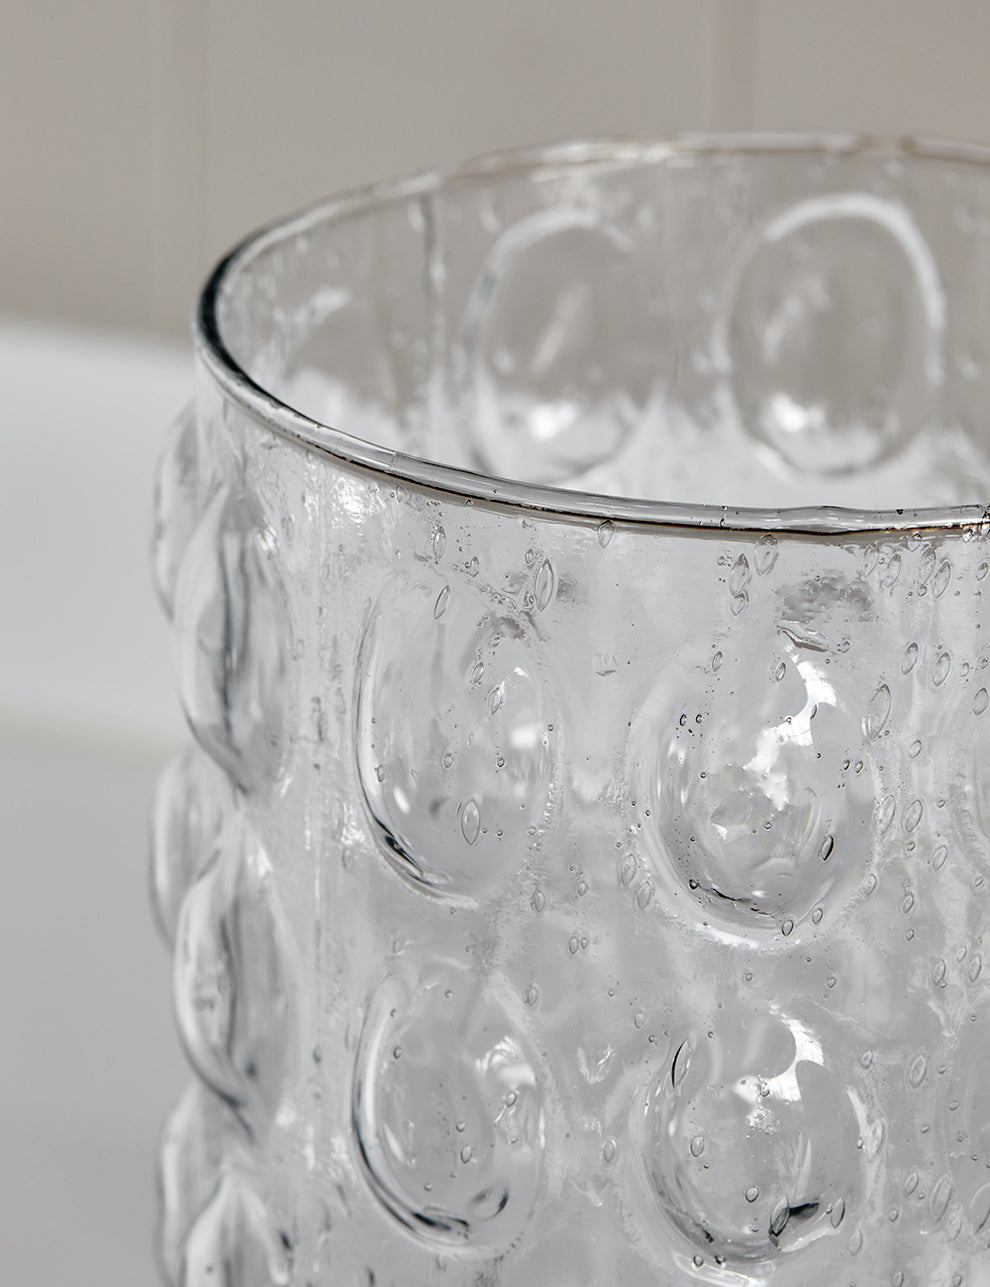 Glass Vase with Bubbles